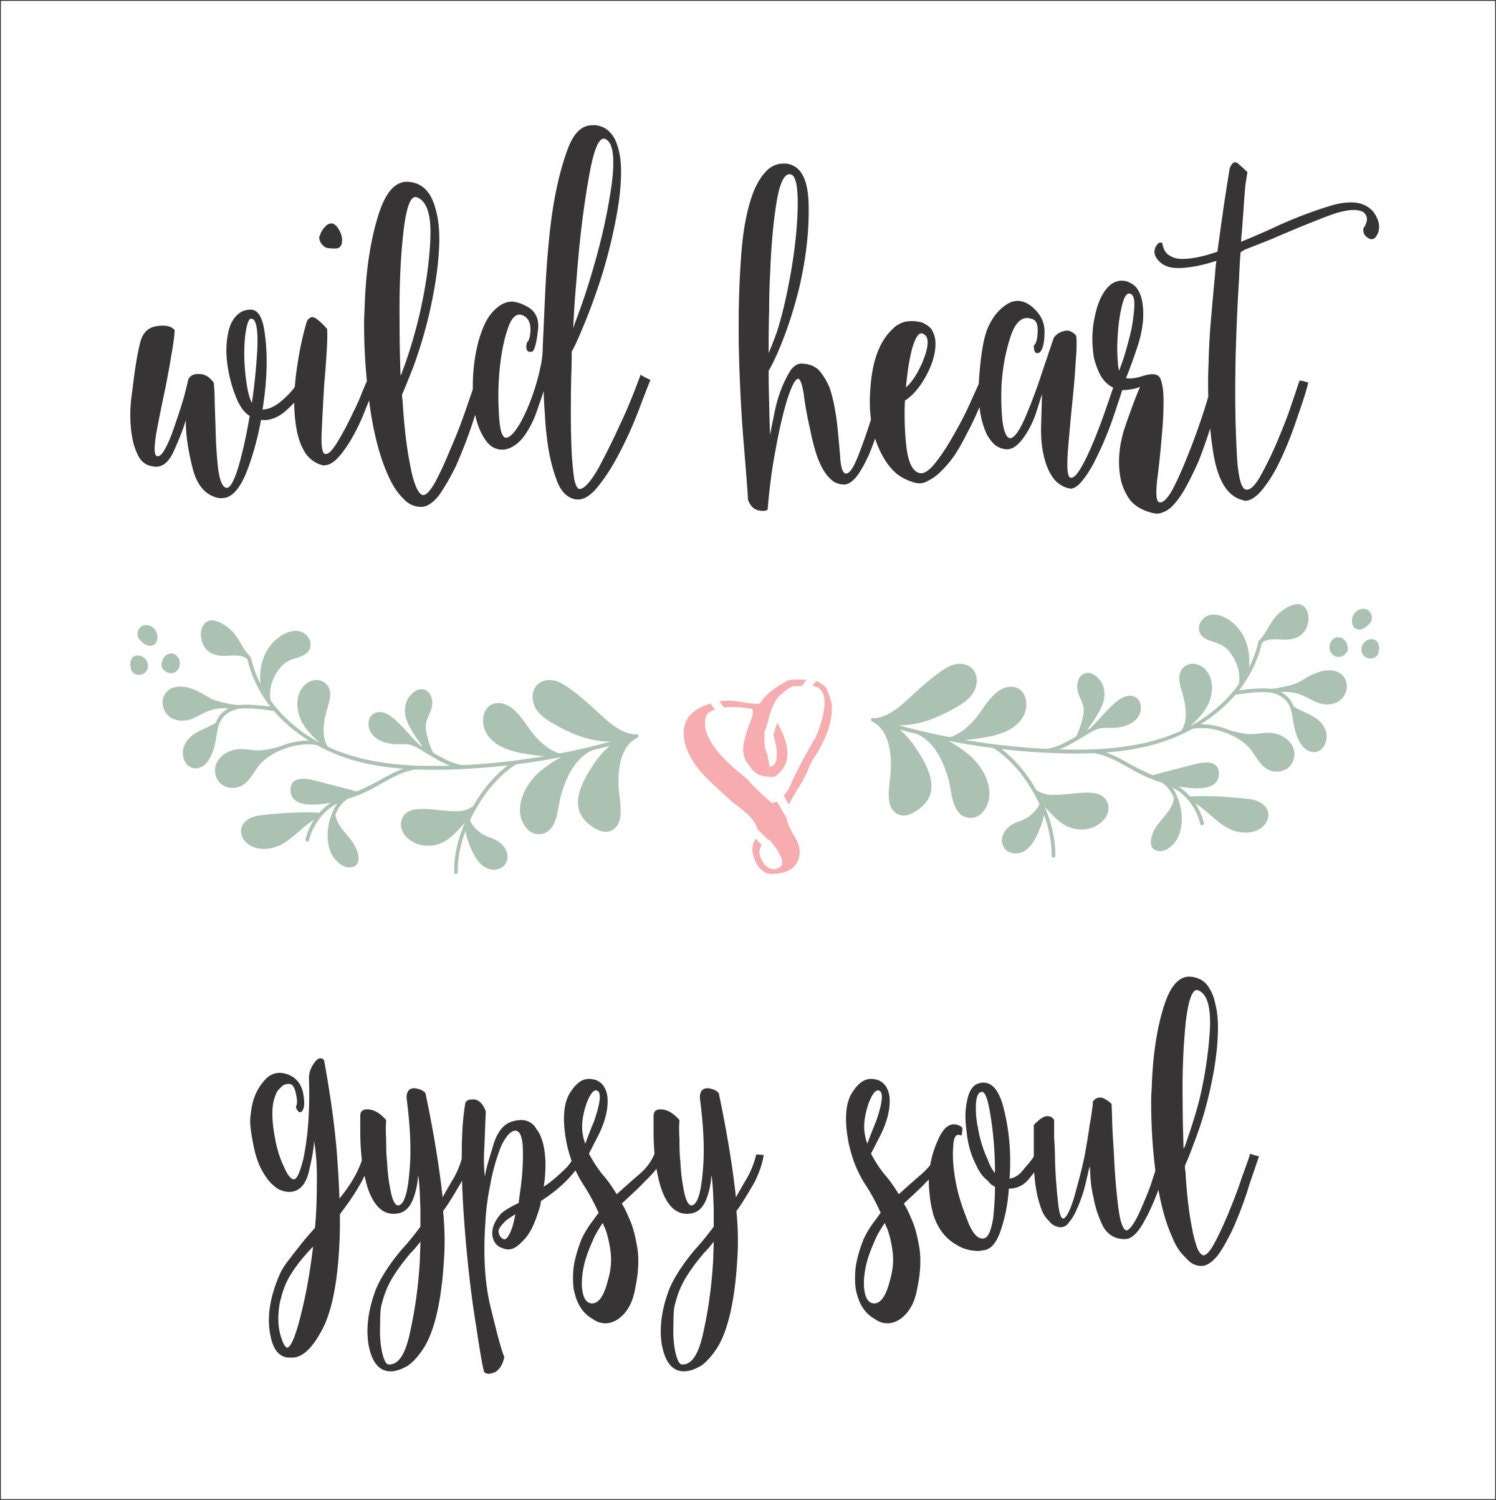 wild heart gypsy soul quotes